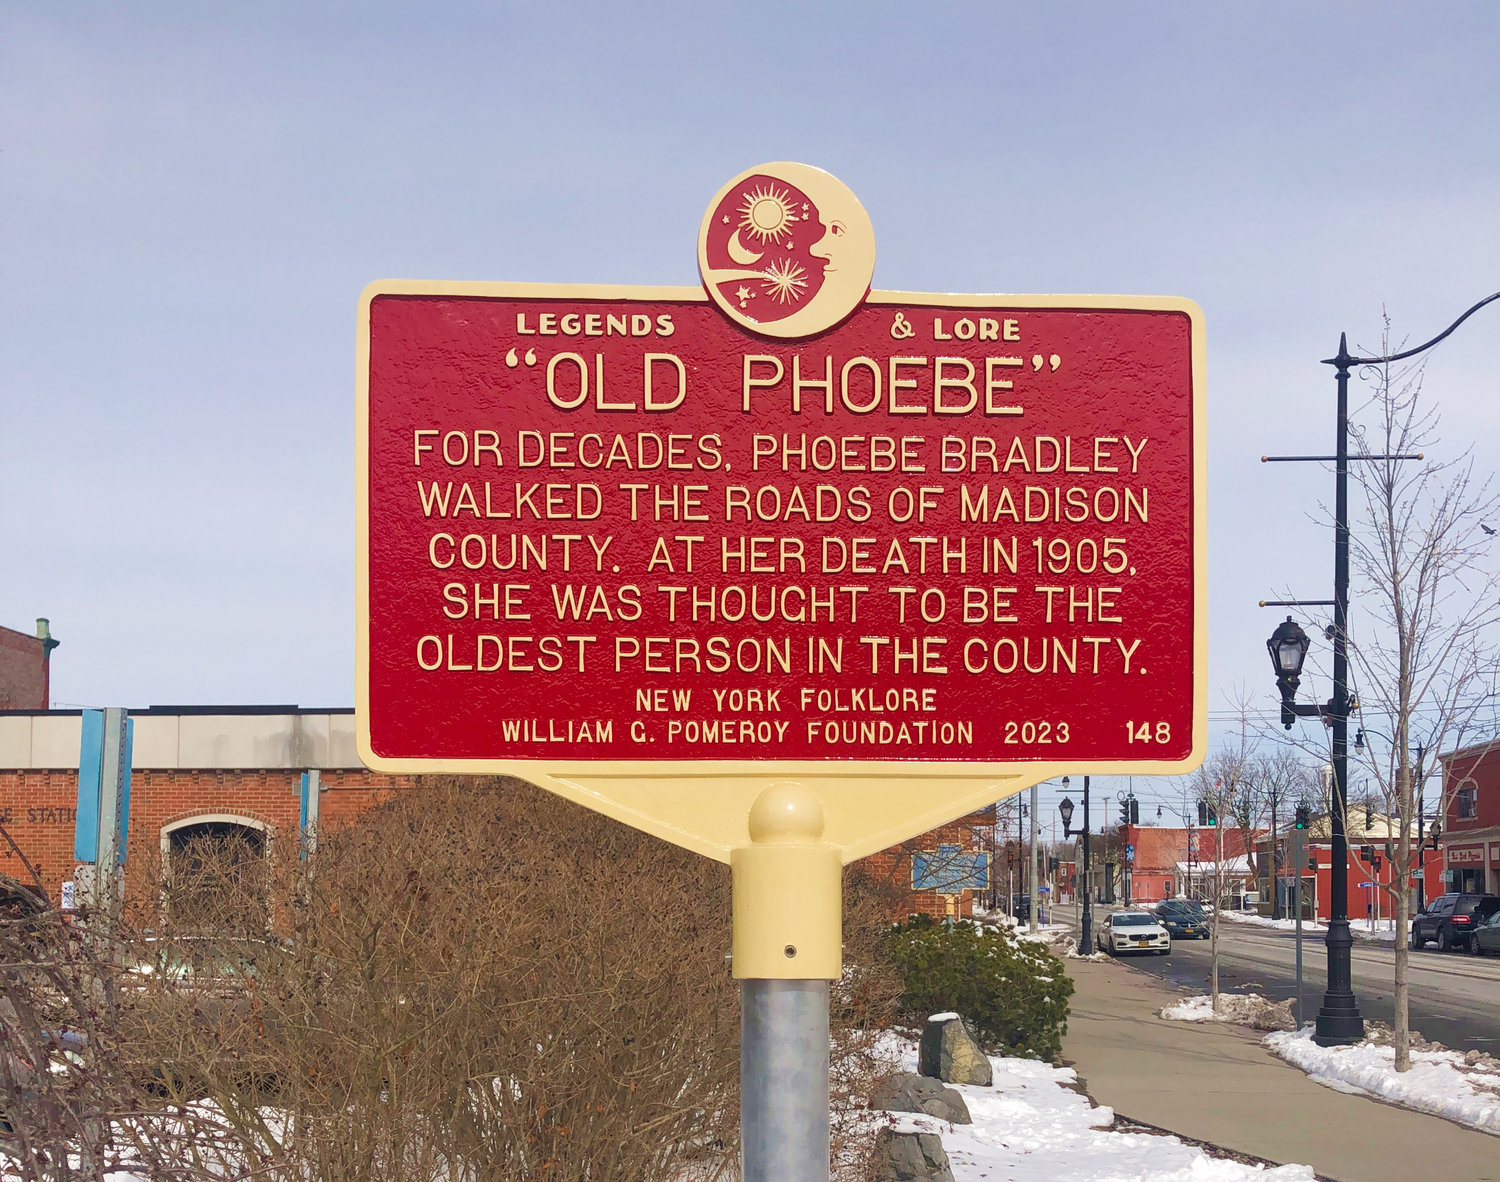 Old Phoebe Bradley was an eccentric wanderer who traveled the back roads of Northern Madison County during the late 19th century.